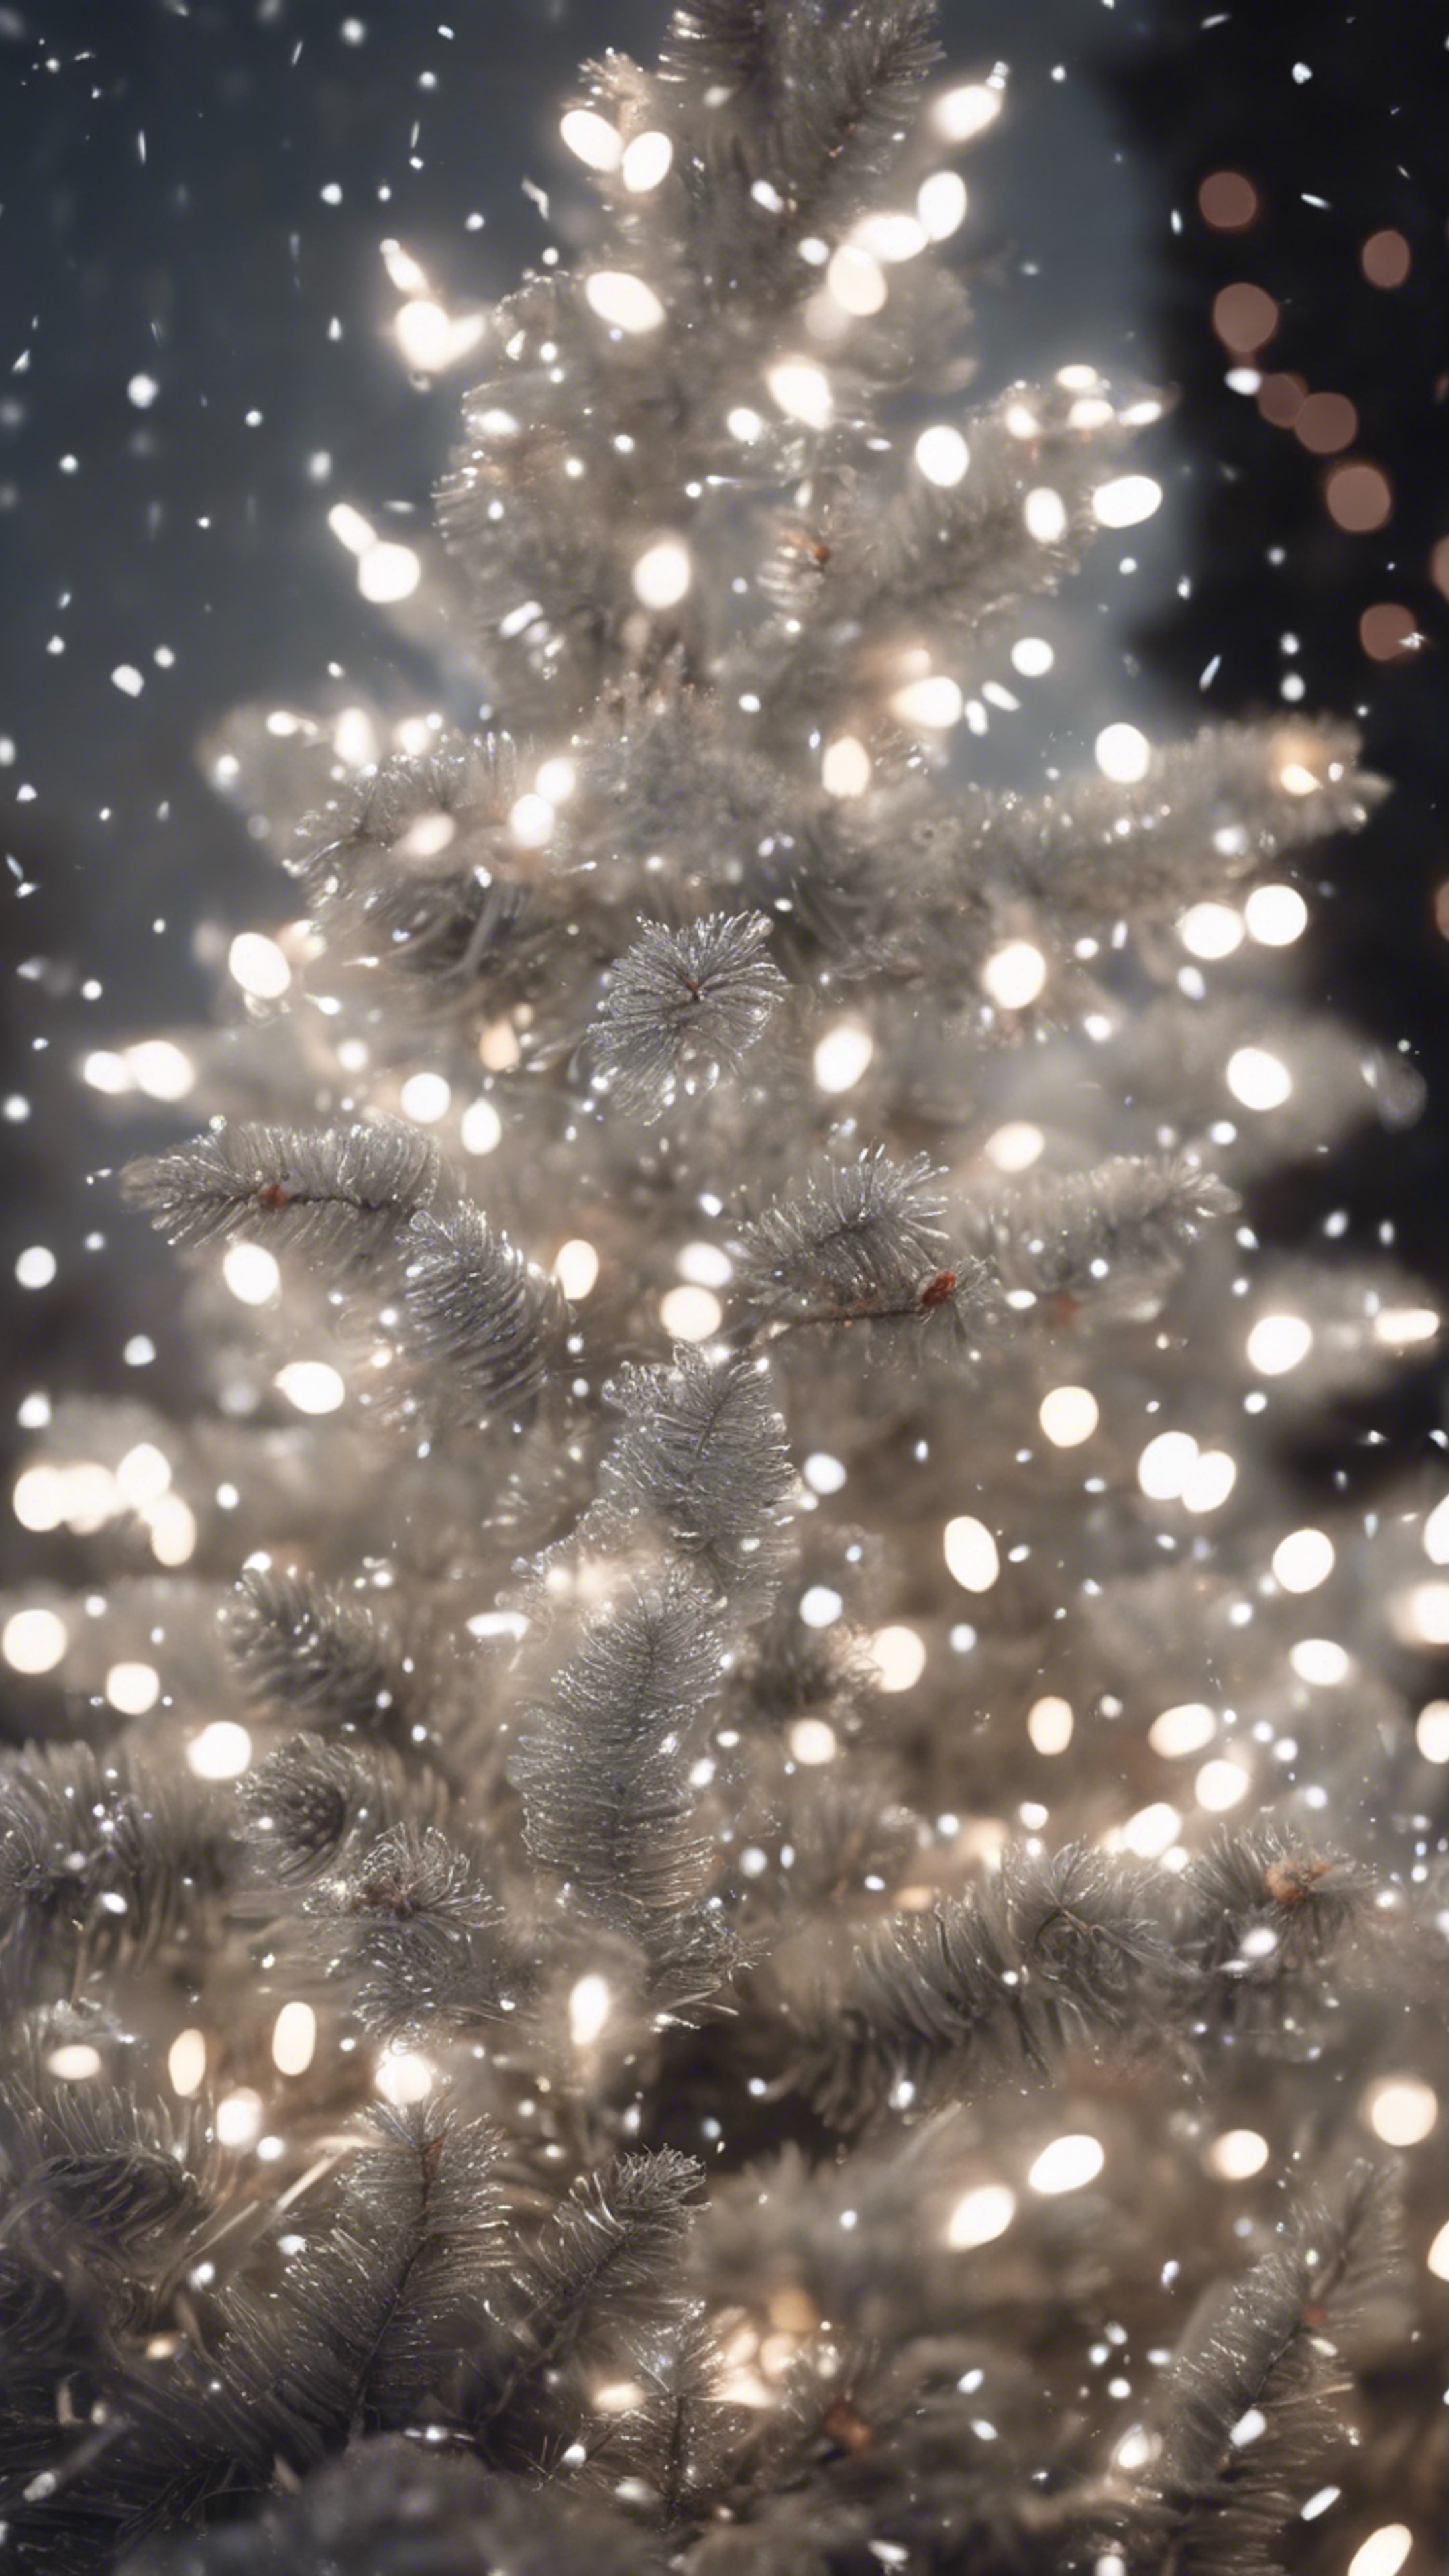 White Christmas lights shimmering on a silver spruce tree, with delicate snowflakes falling around.